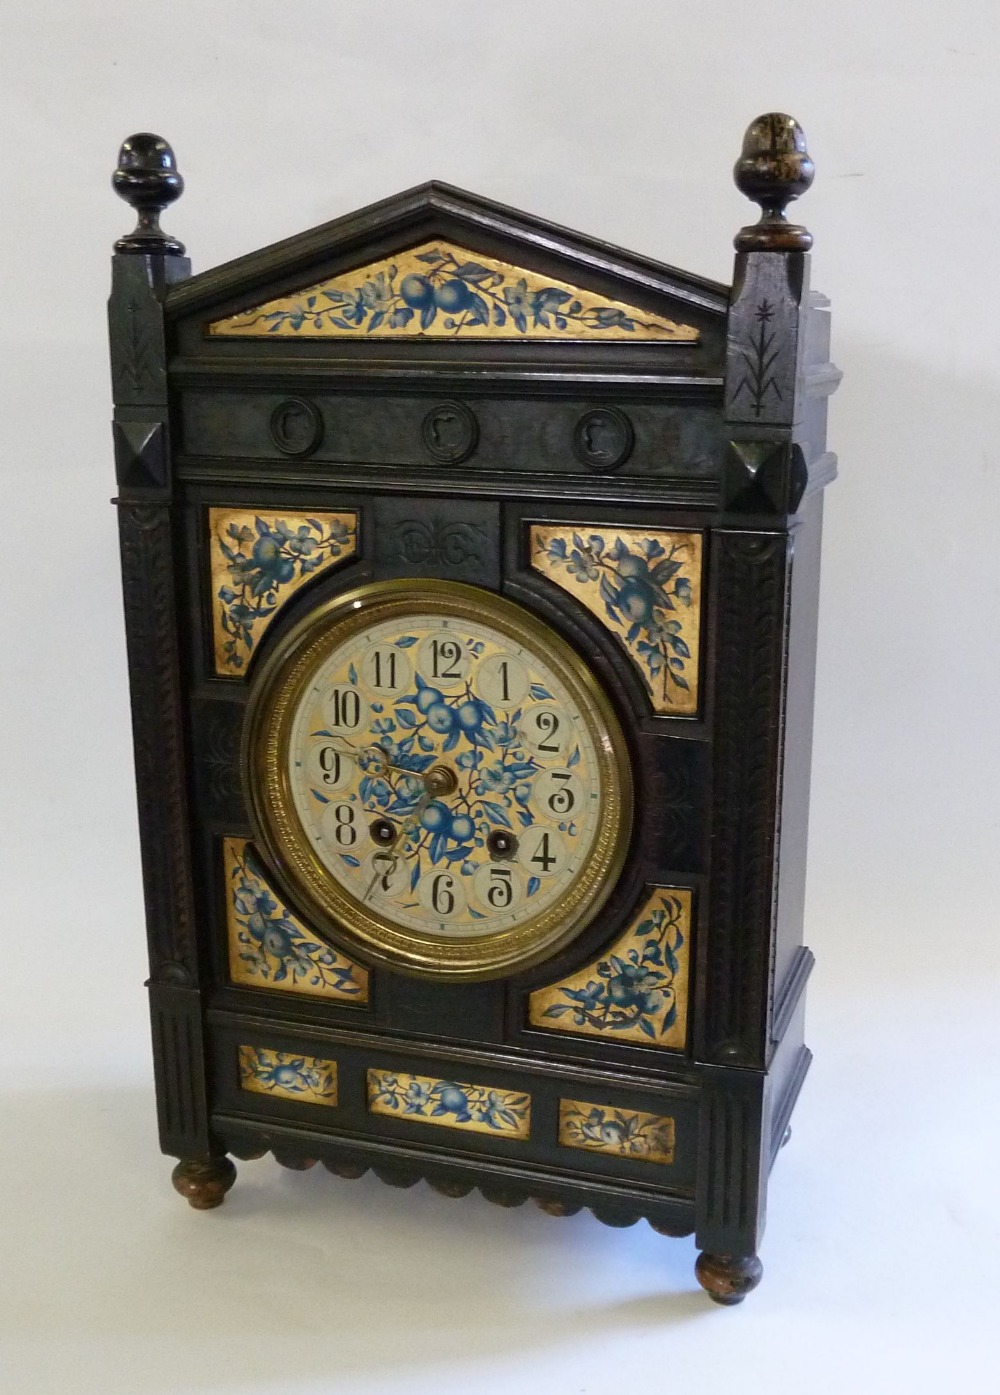 LATE VICTORIAN AESTHETIC MOVEMENT MANTEL CLOCK, the ebonised case carved with plumed corner